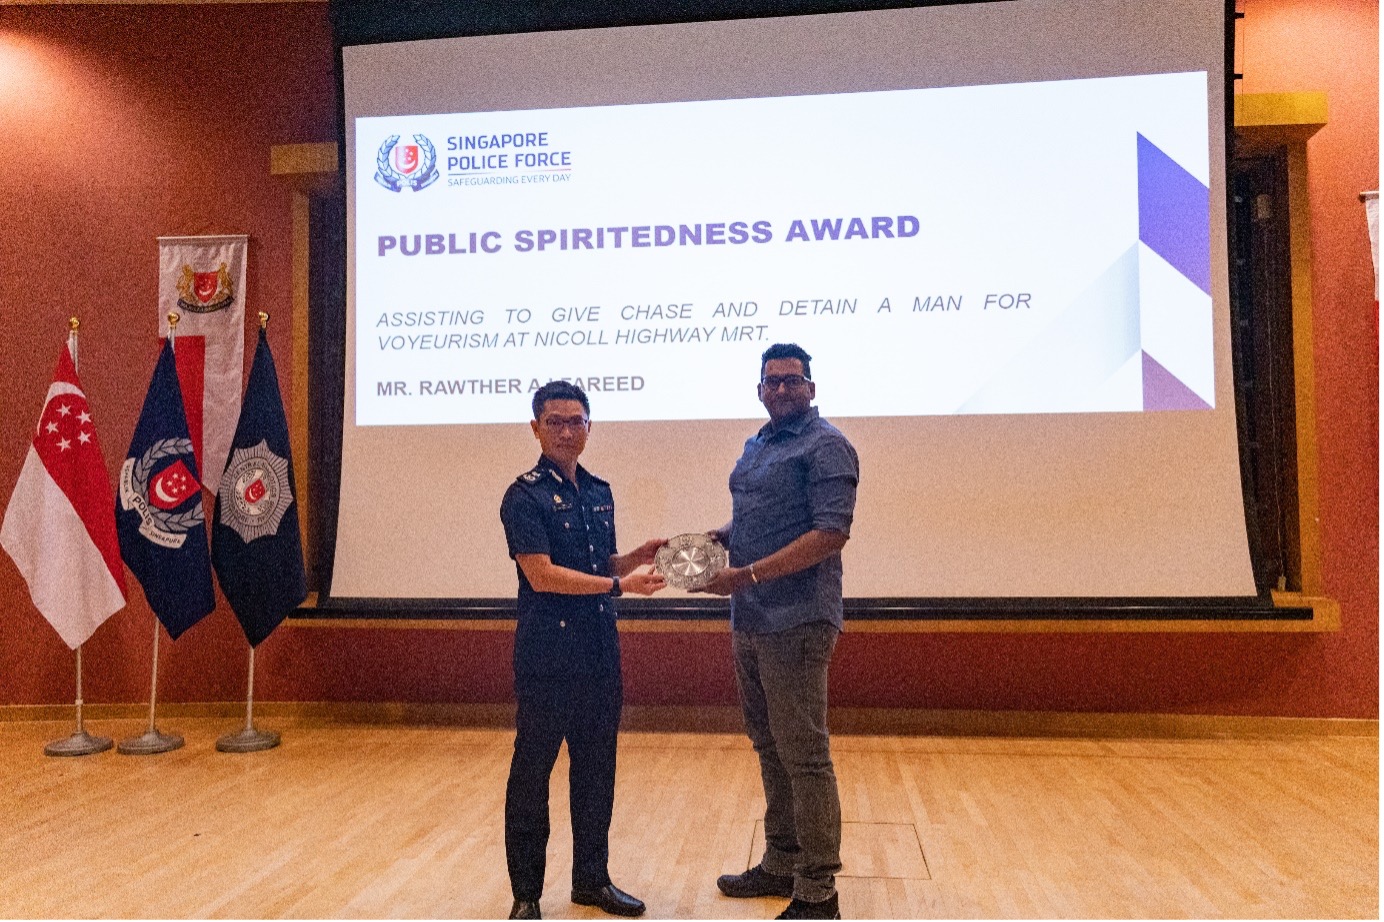 20220818_eleven_members_of_the_public_presented_with_public_spiritedness_award6